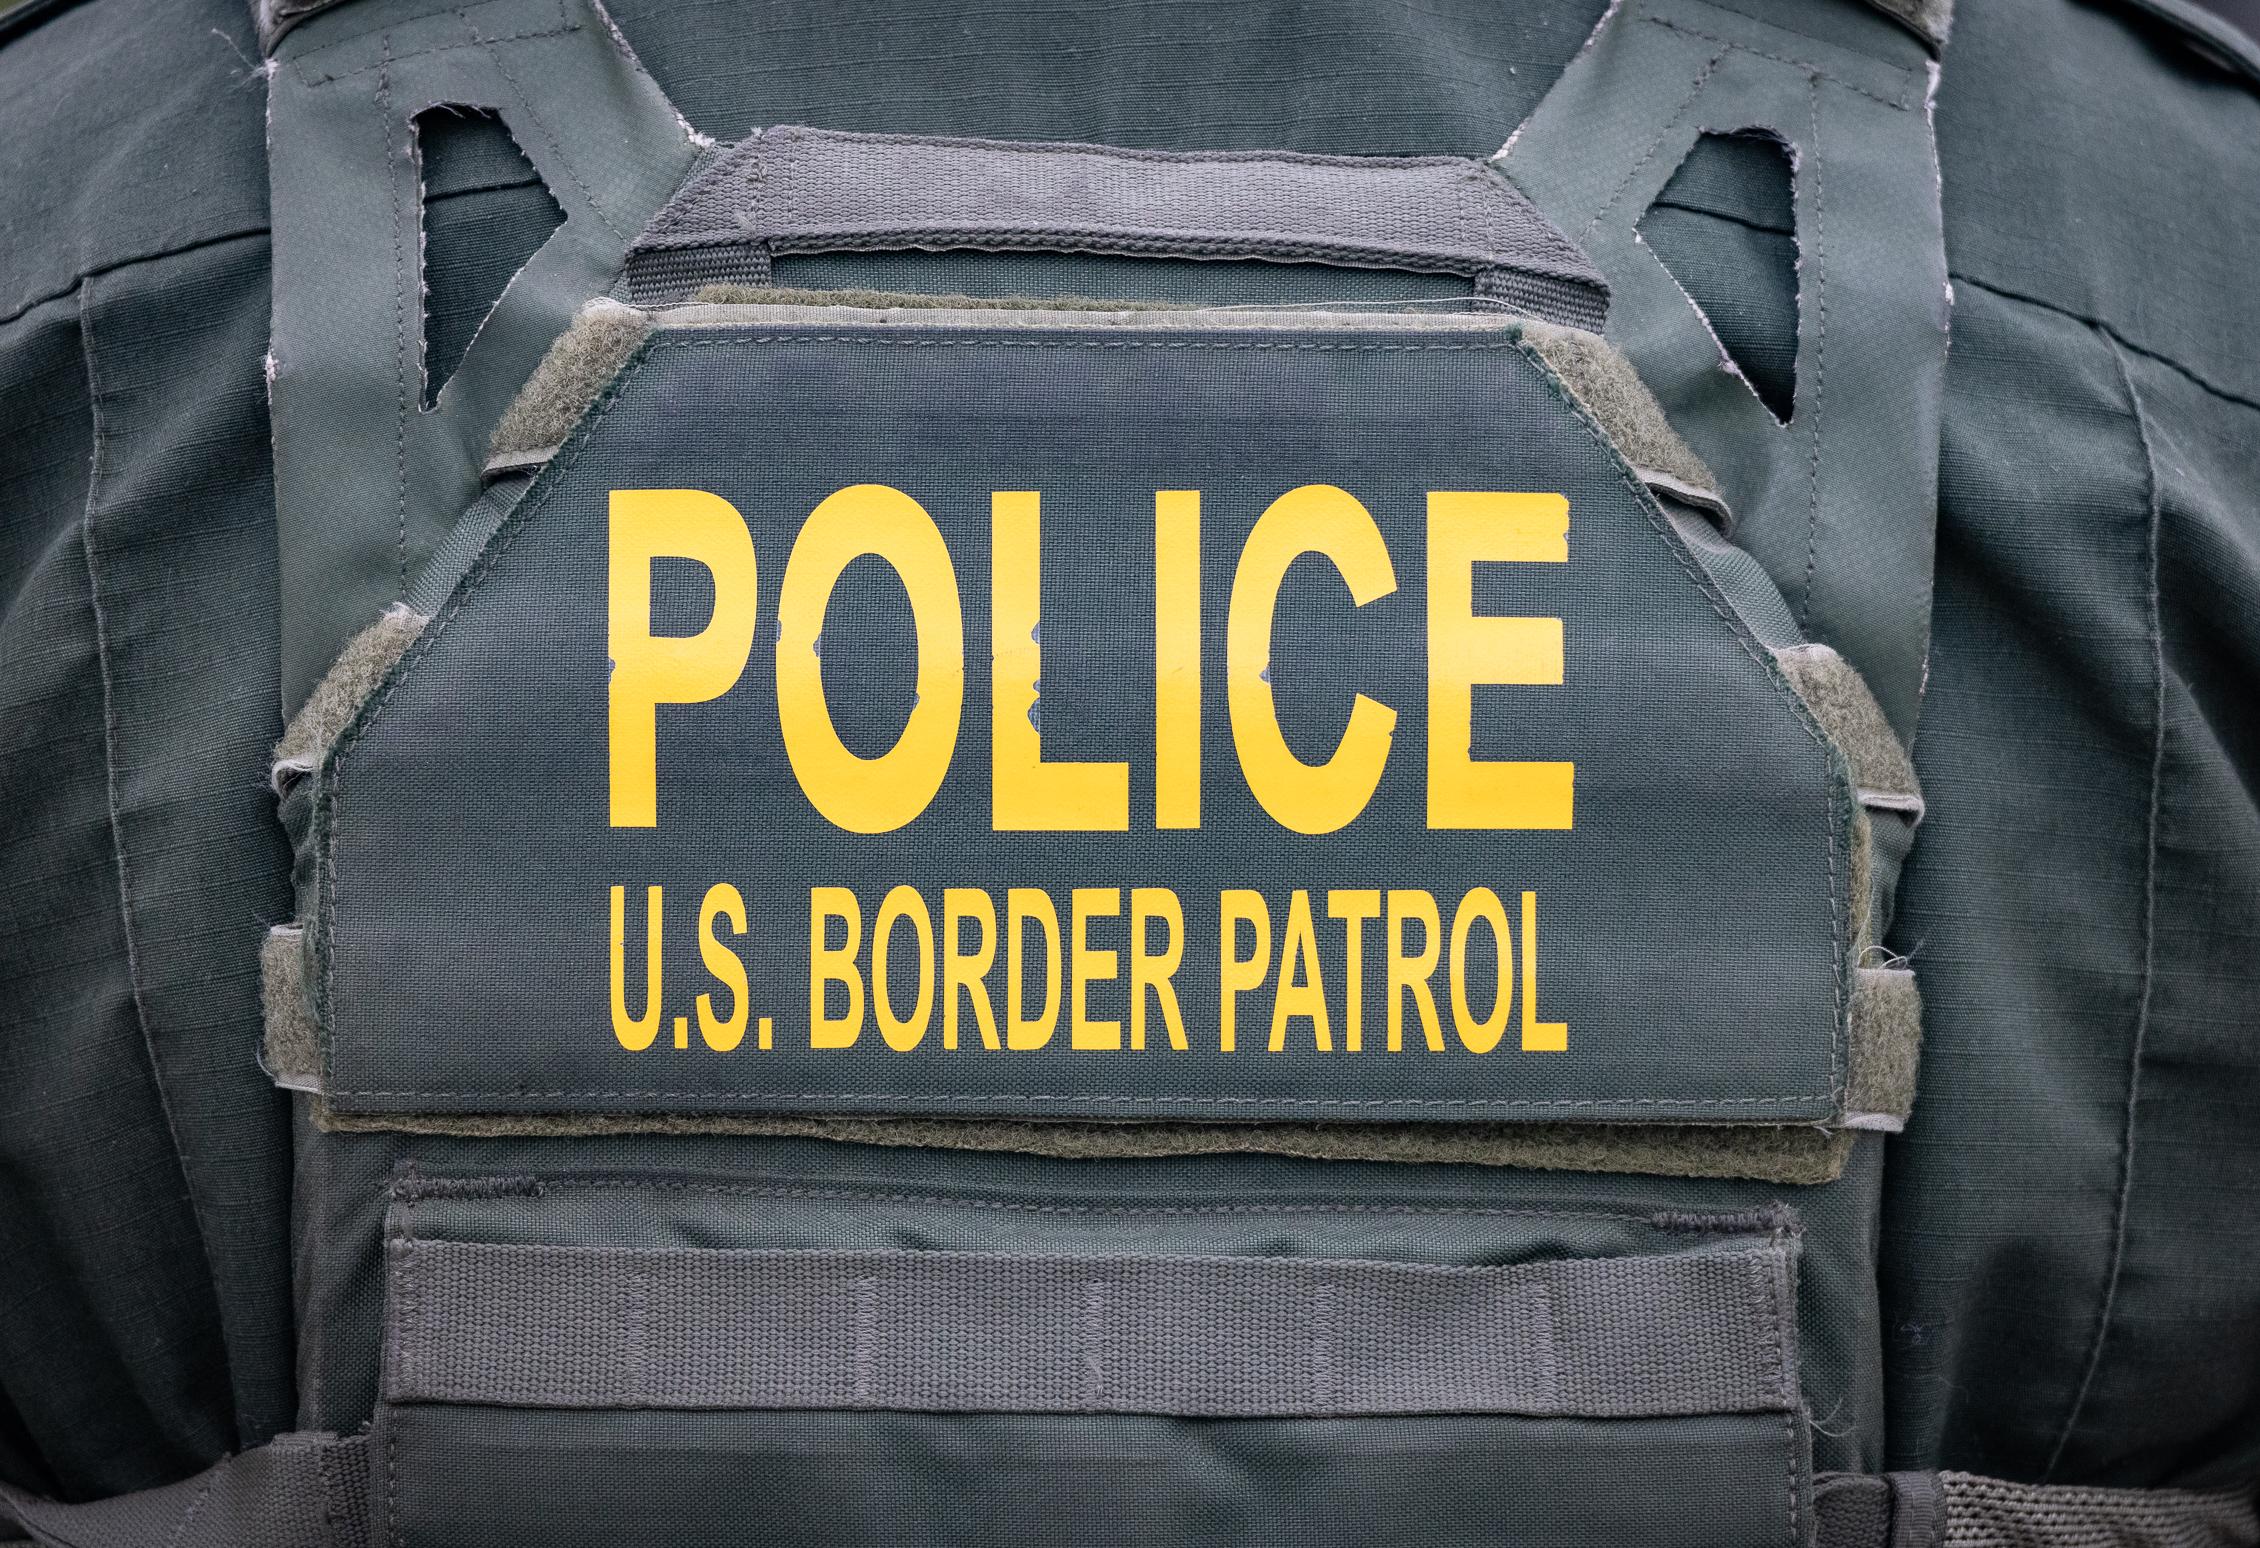 Ex-Border Patrol Agent Gets Over 7 Years for Accepting Bribes, Smuggling